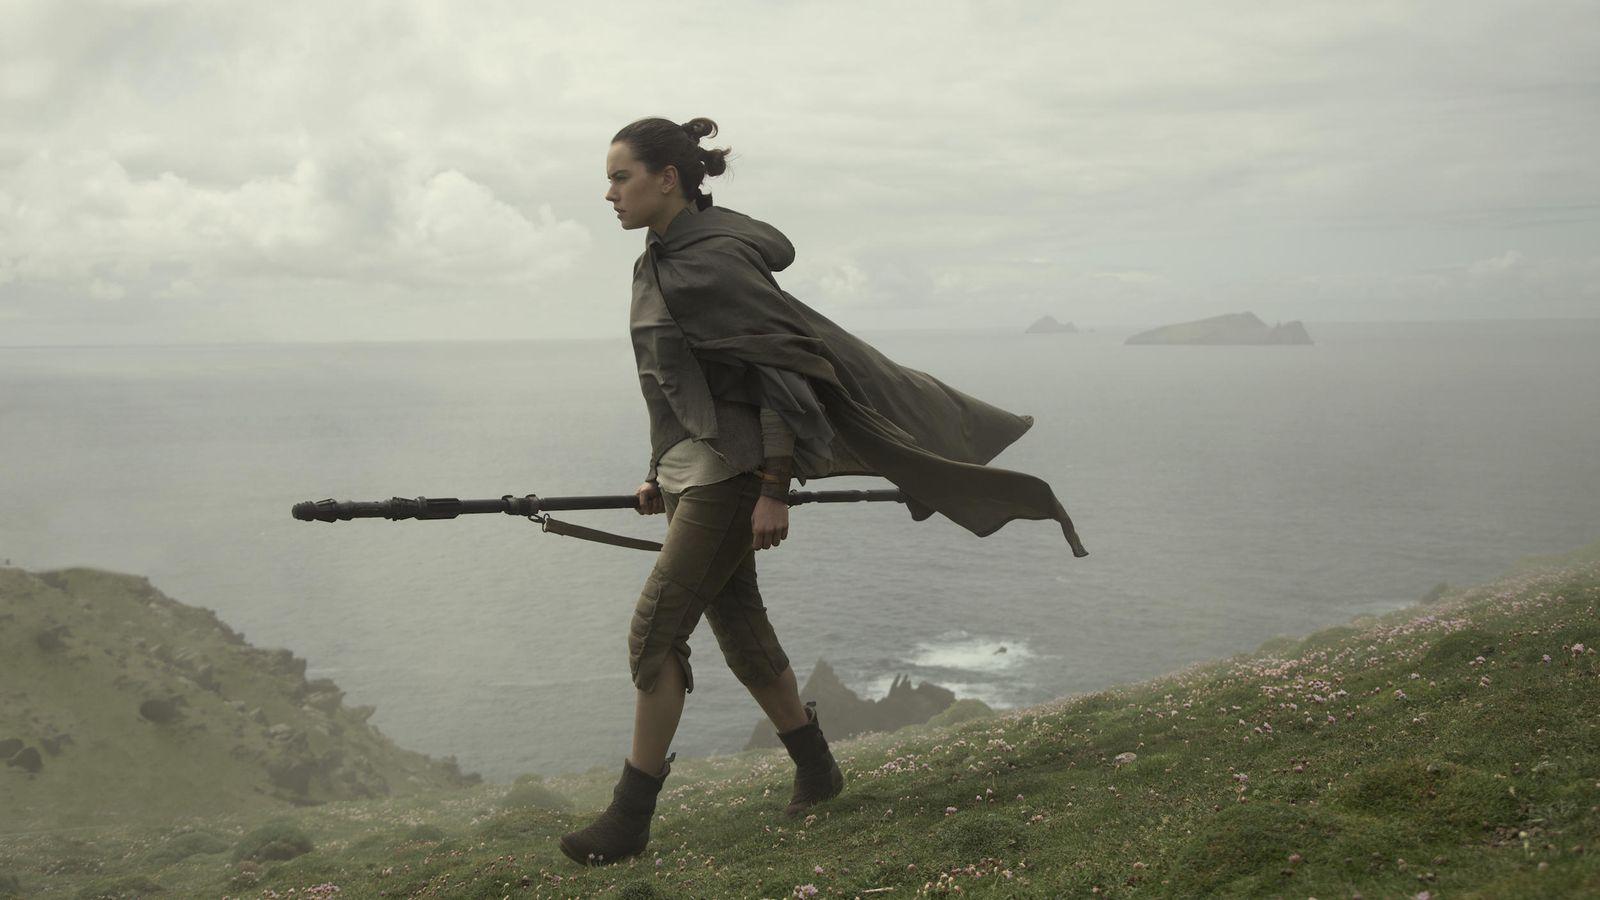 Star Wars Episode 9: Release date, cast, director and theories